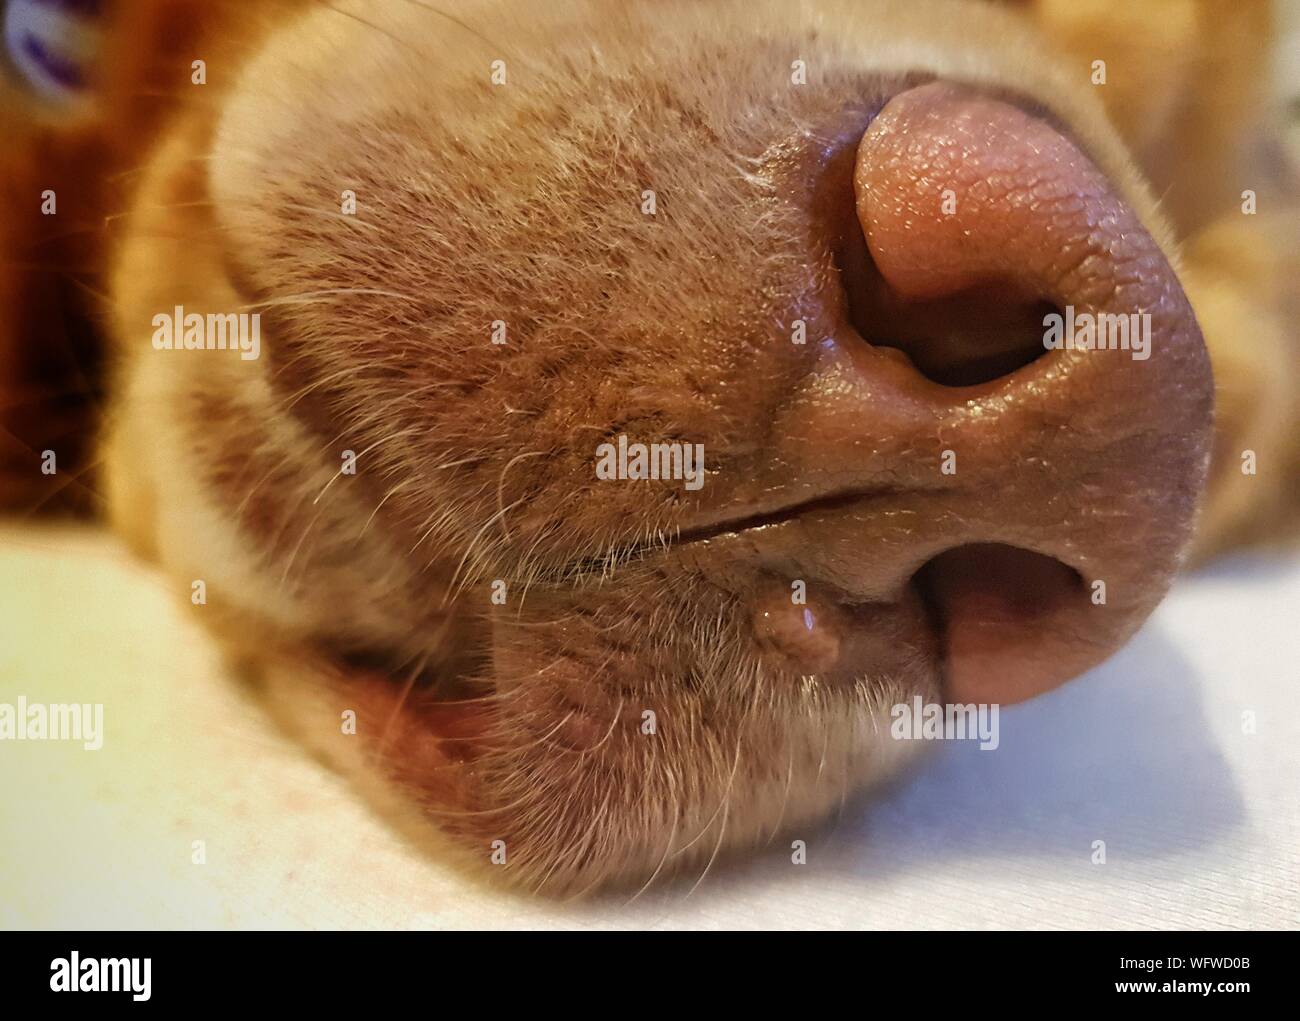 how do you look inside a dogs mouth